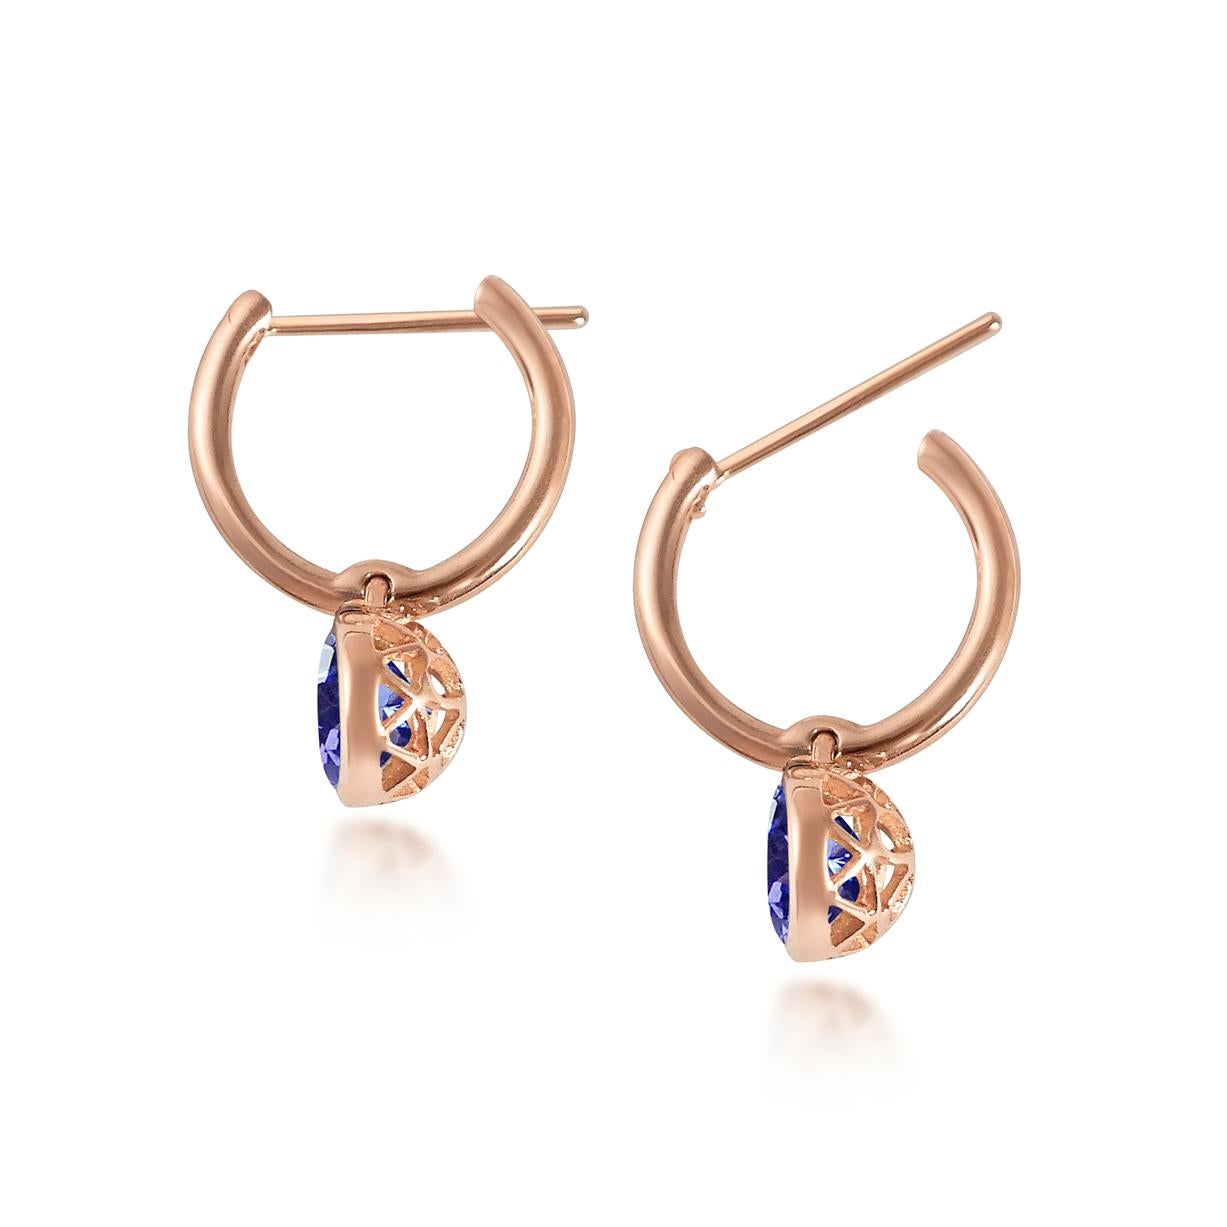 Handcrafted 2.80 Carats Tanzanite 18 Karat Rose Gold Drop Earrings. The 8mm natural stones are set in our iconic hand pierced gold lace to let the light through. Our precious and fine stones on our dangling earrings are highlighted by a diamond on